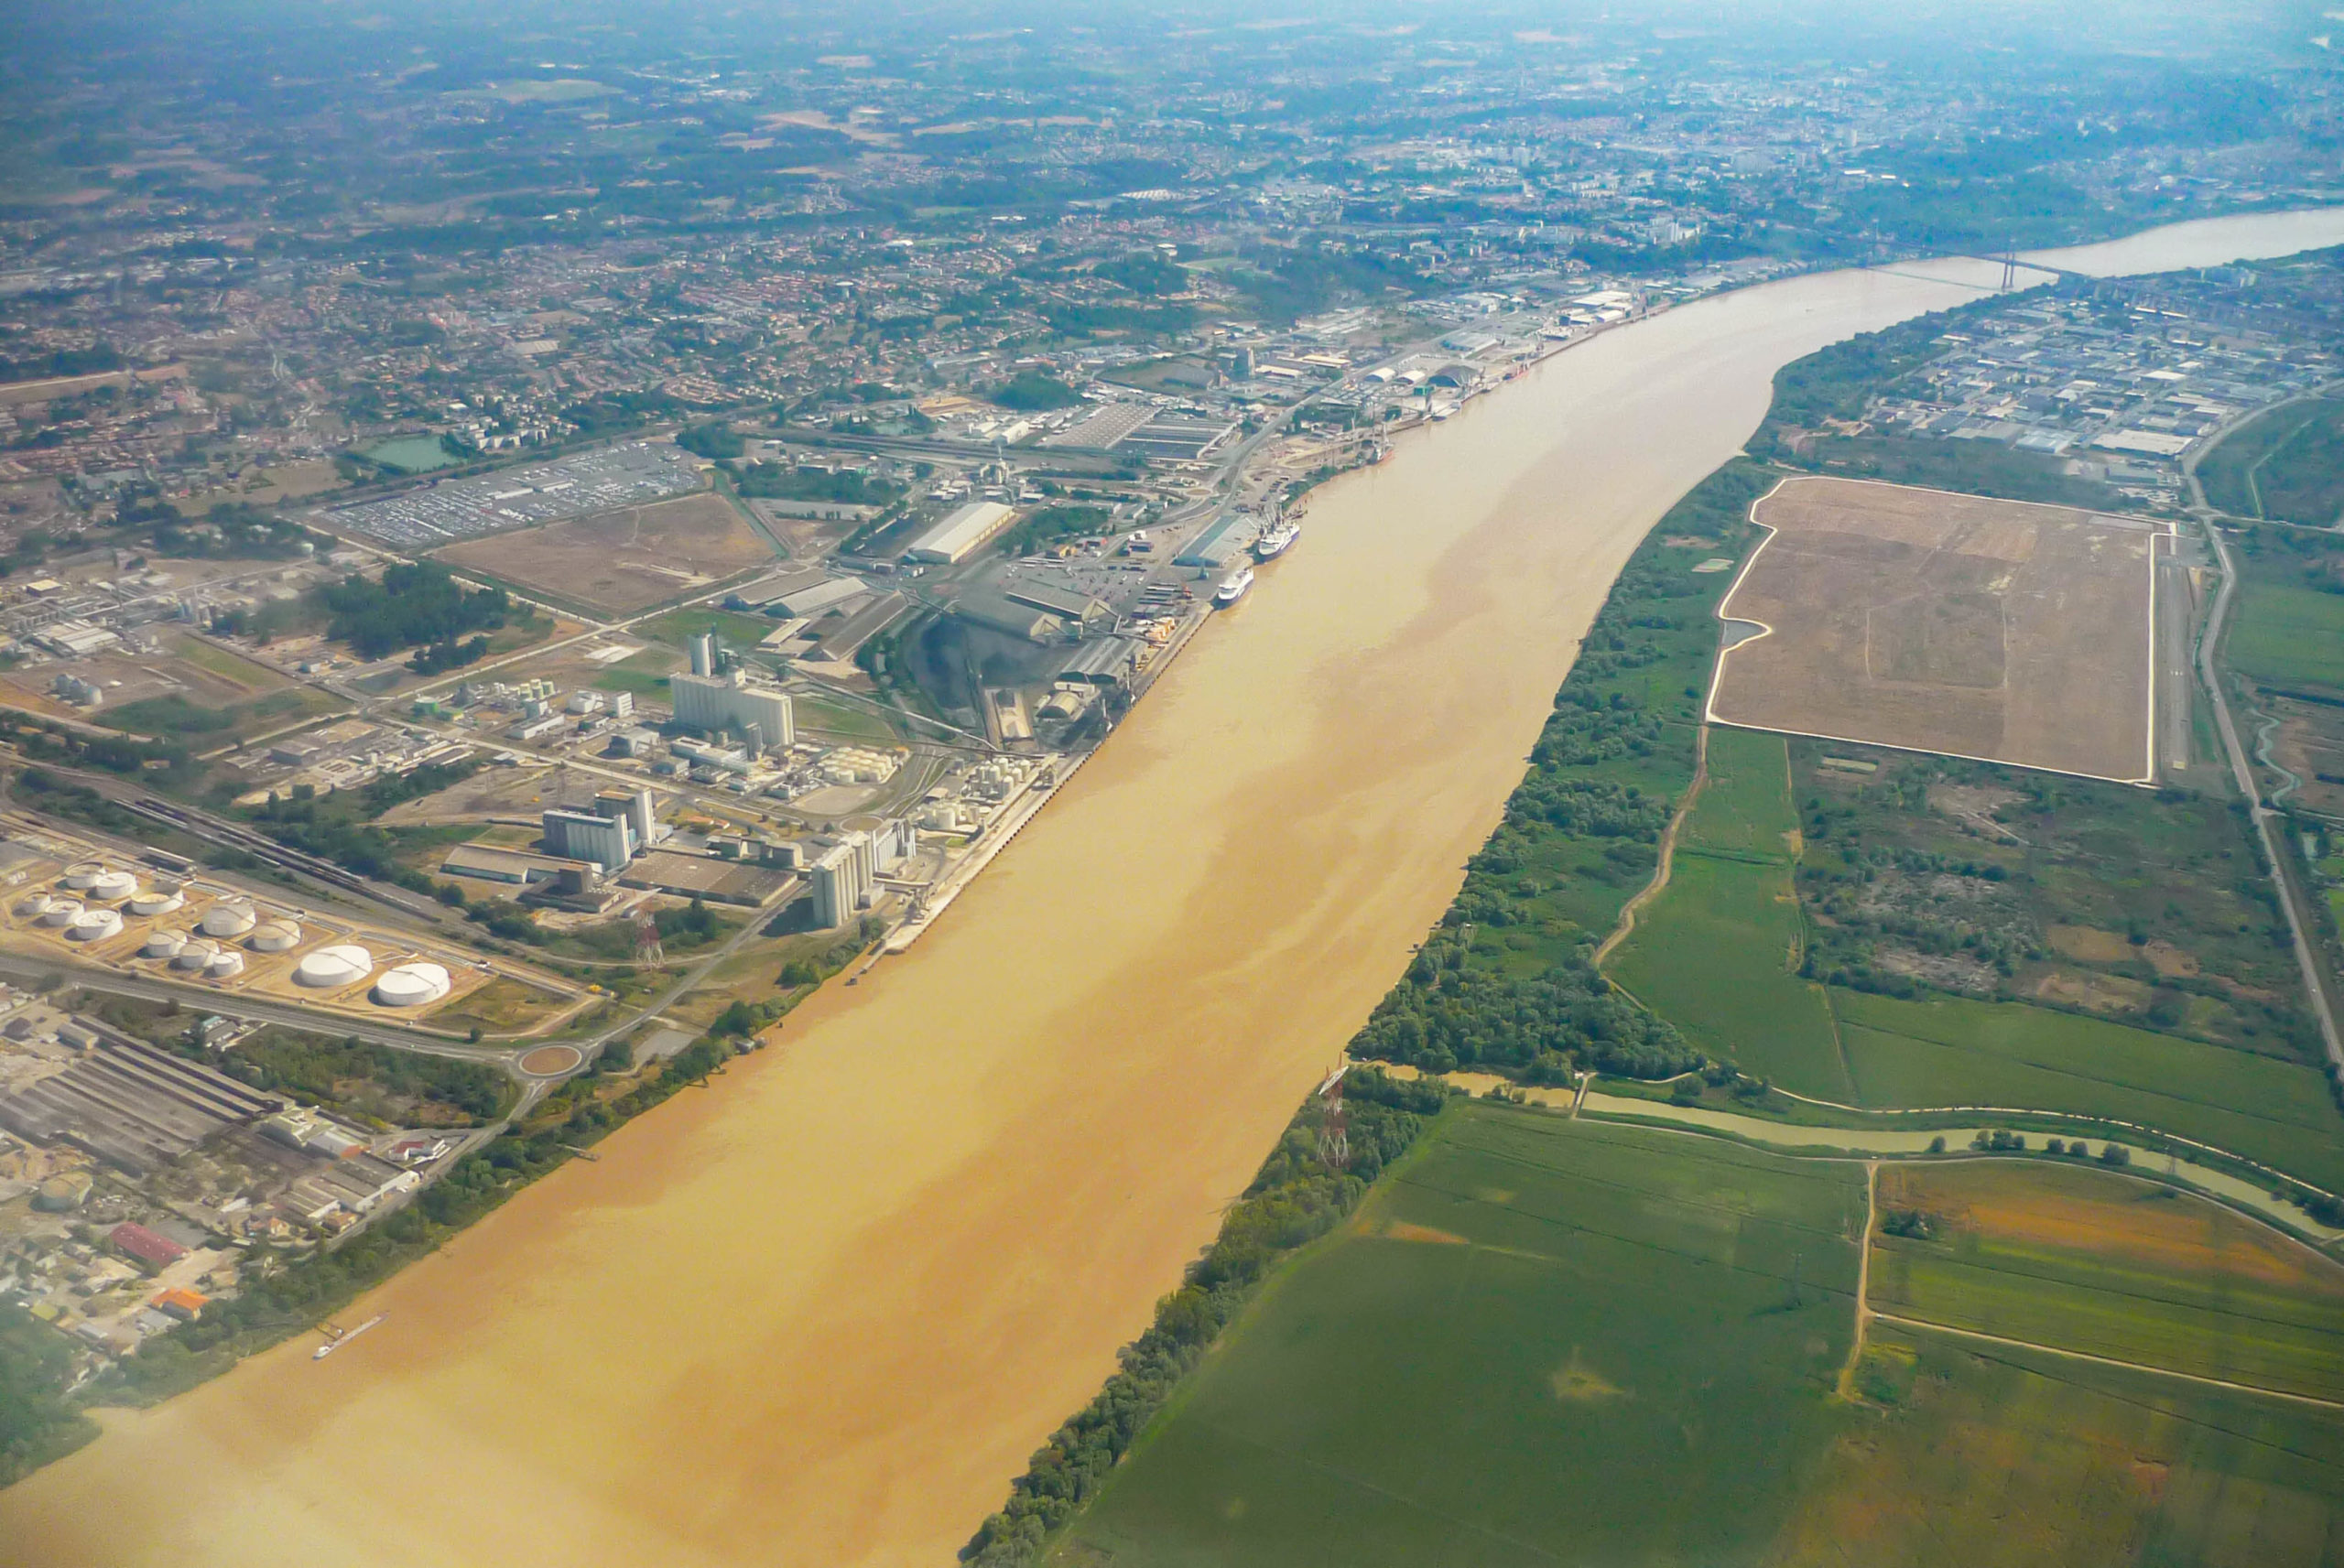 The Garonne north of Bordeaux on its way to the Gironde estuary © French Moments